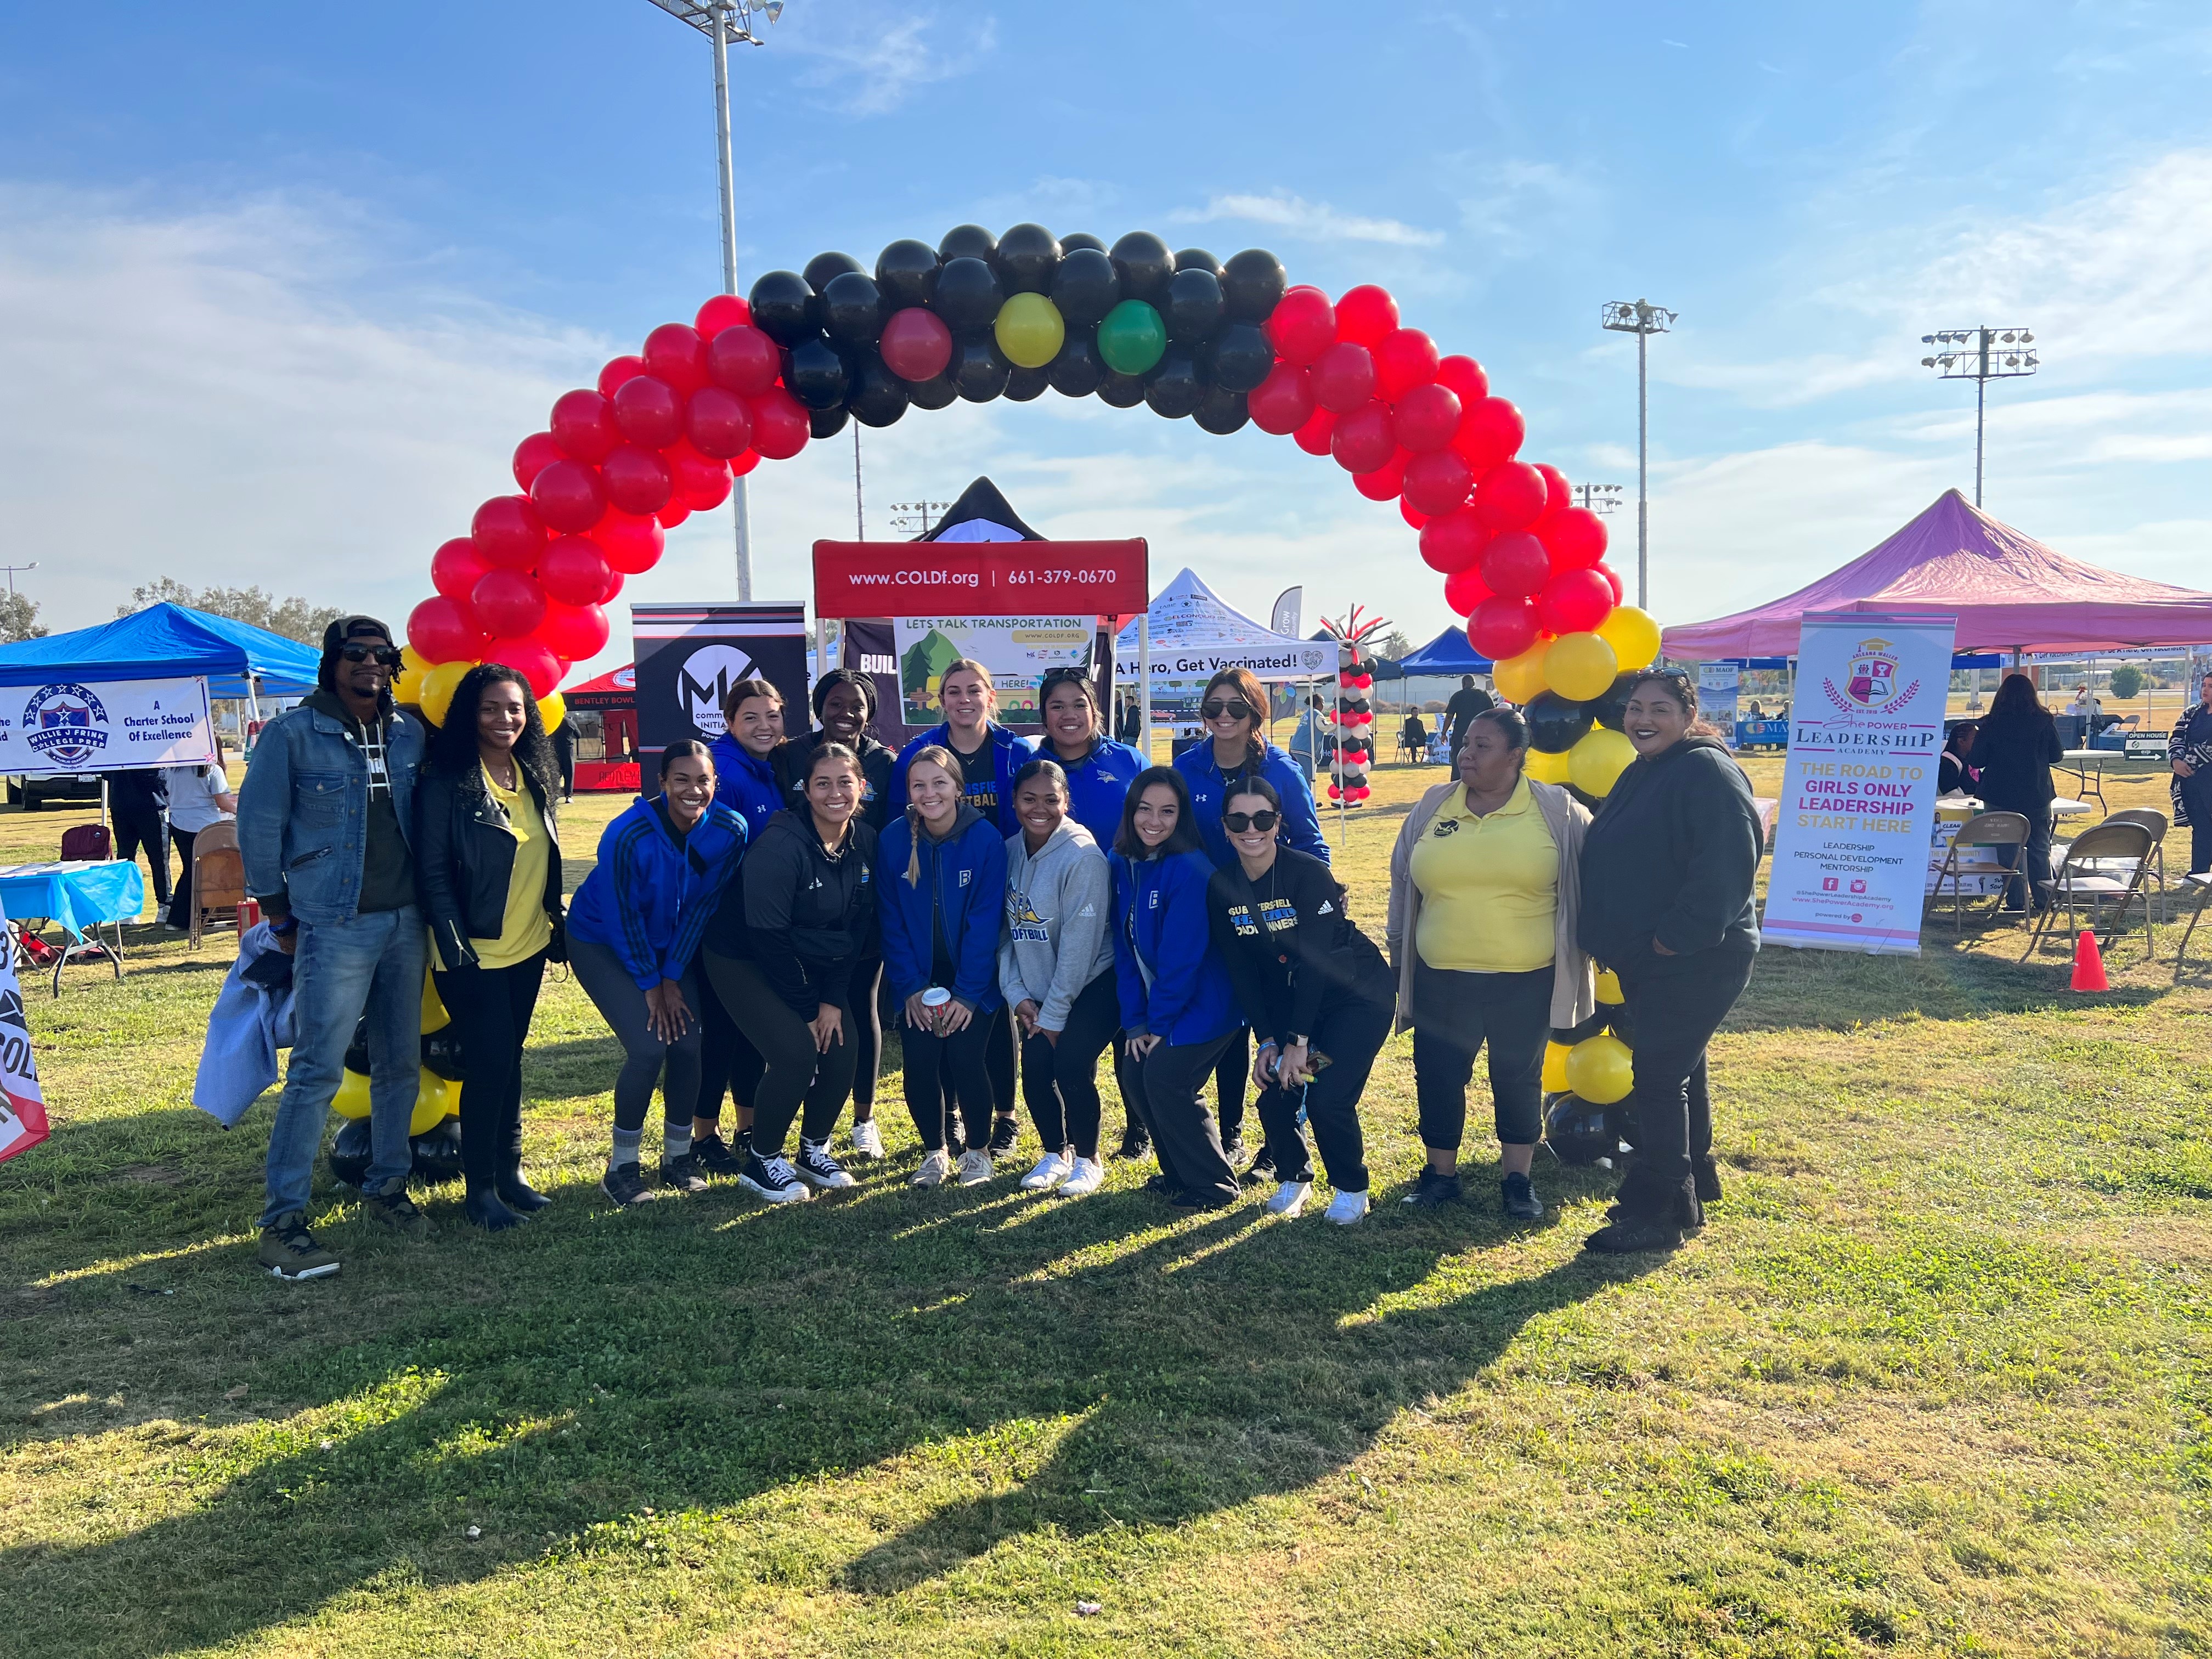 Project team and community residents under balloon arch during Transportation Day event